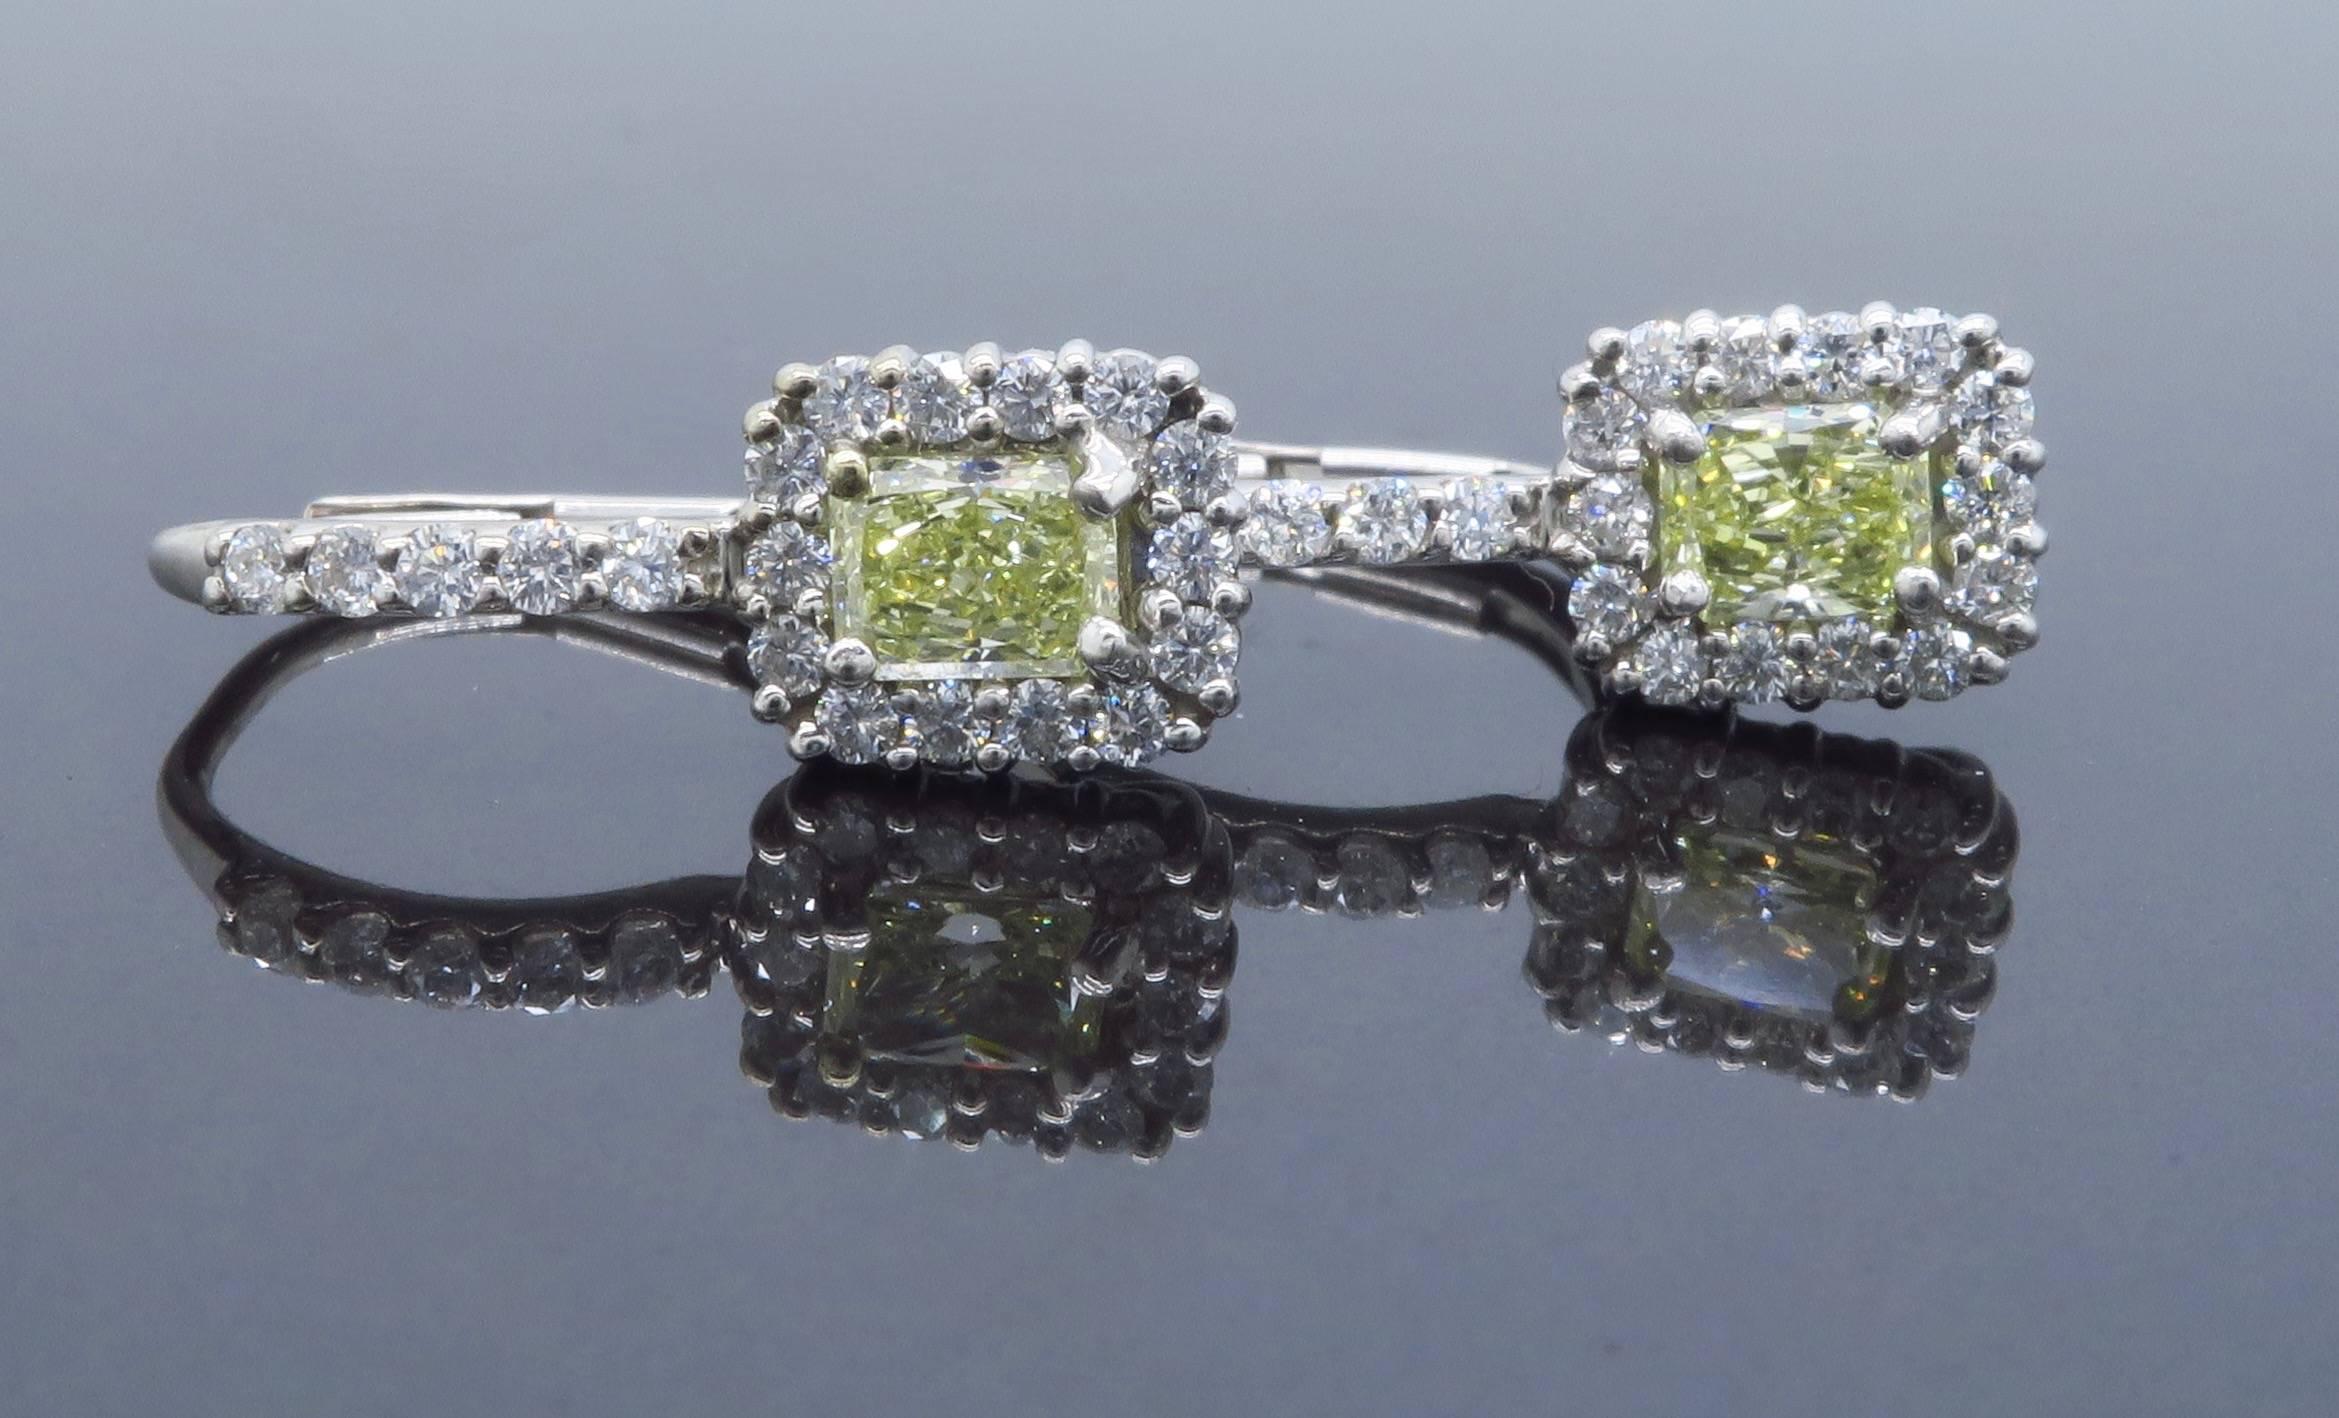 These gorgeous earrings feature two approximately .30CT Radiant Cut Diamonds, the featured diamonds are yellow in color and display VS clarity. There are 19 additional Round Brilliant Cut Diamonds surrounding each featured diamond. There is